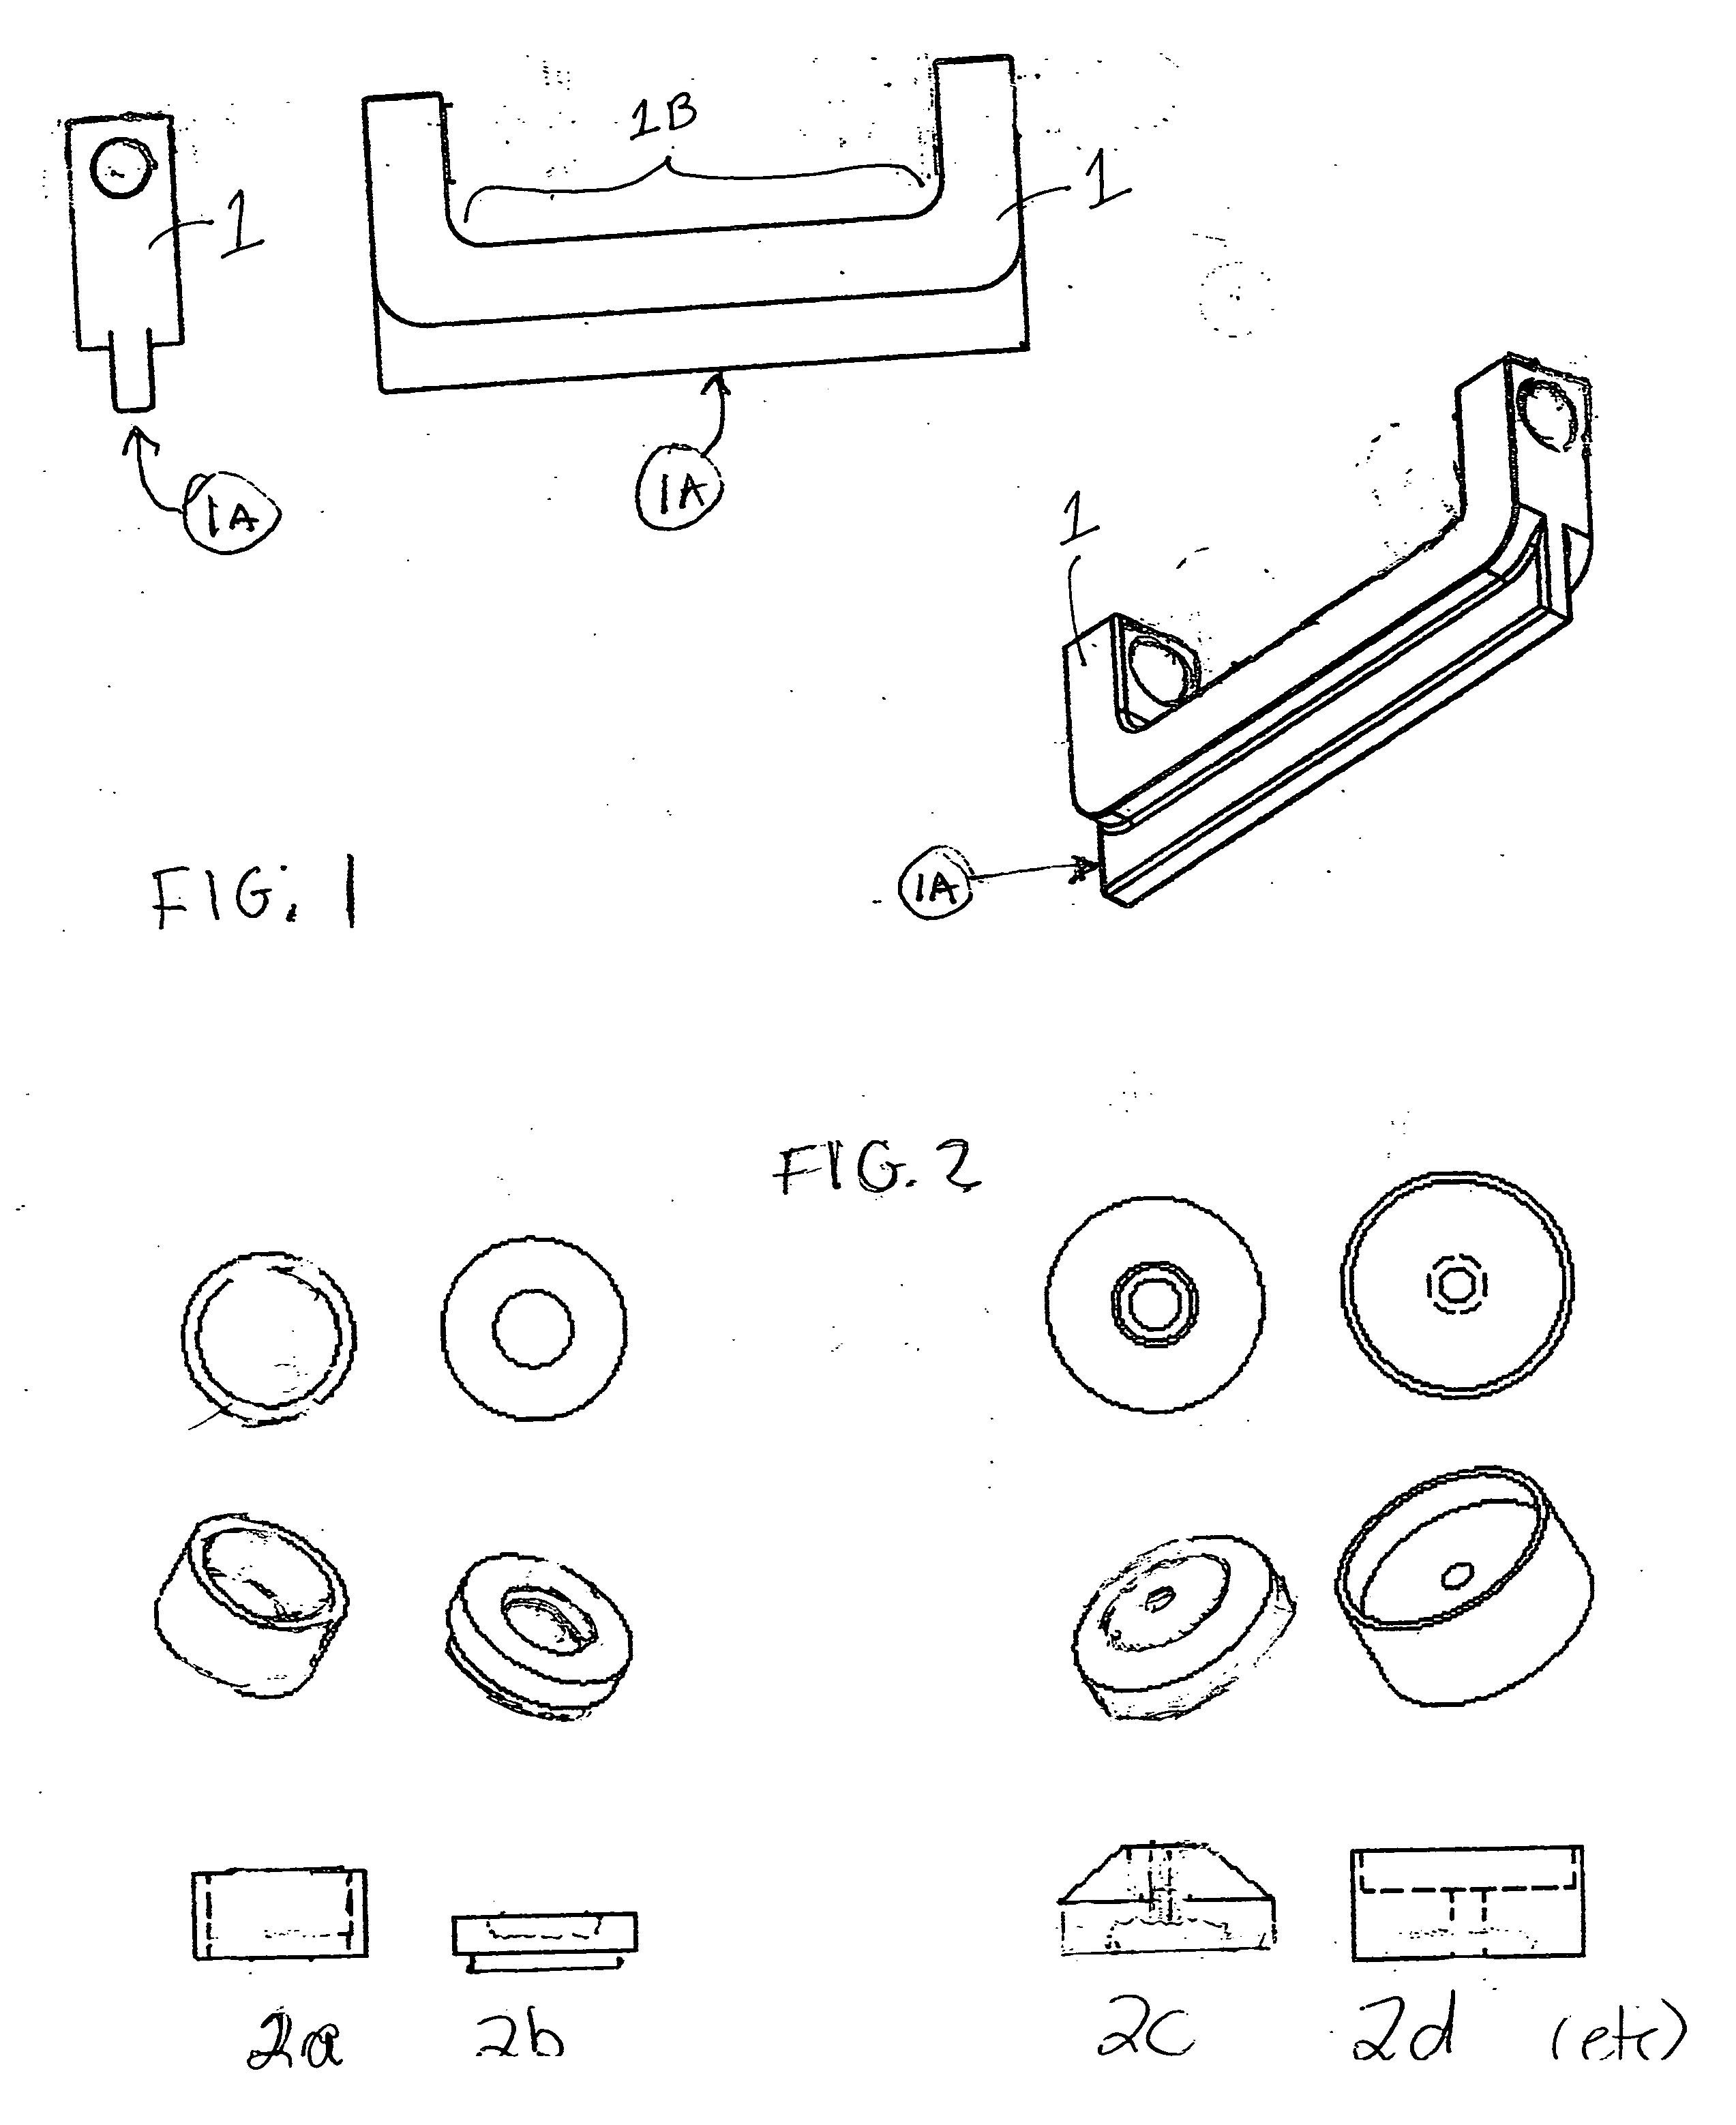 Portable hydraulic bushing press device and related method of manufacturing thereof